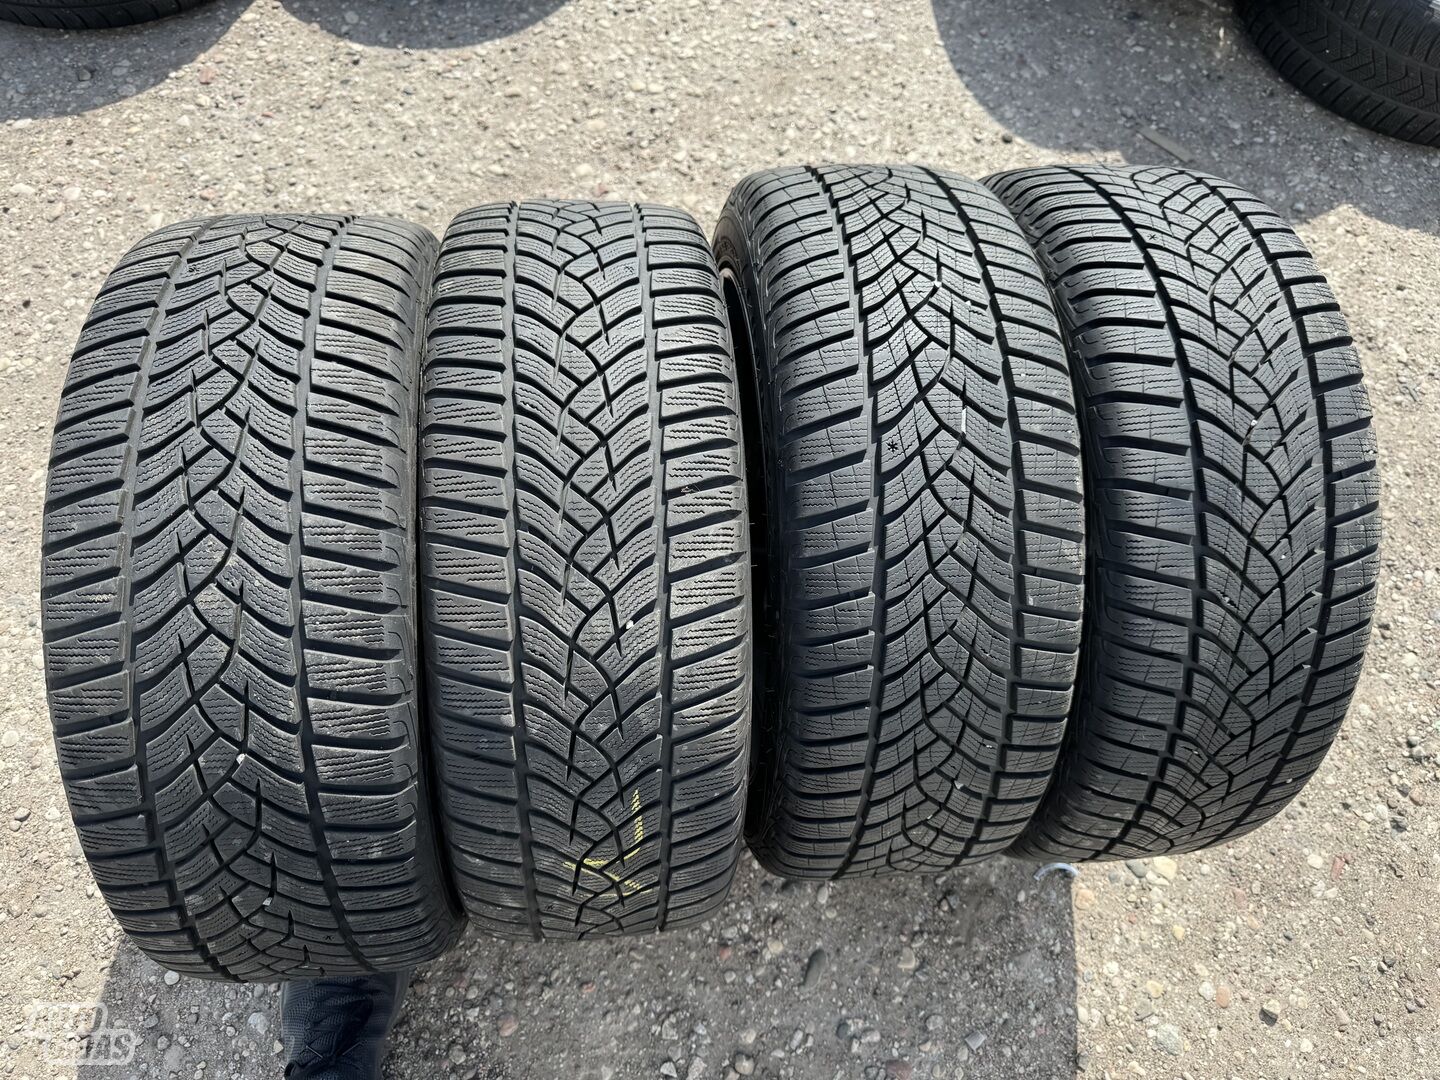 Goodyear Siunciam, 7-8mm 2018 R18 universal tyres passanger car